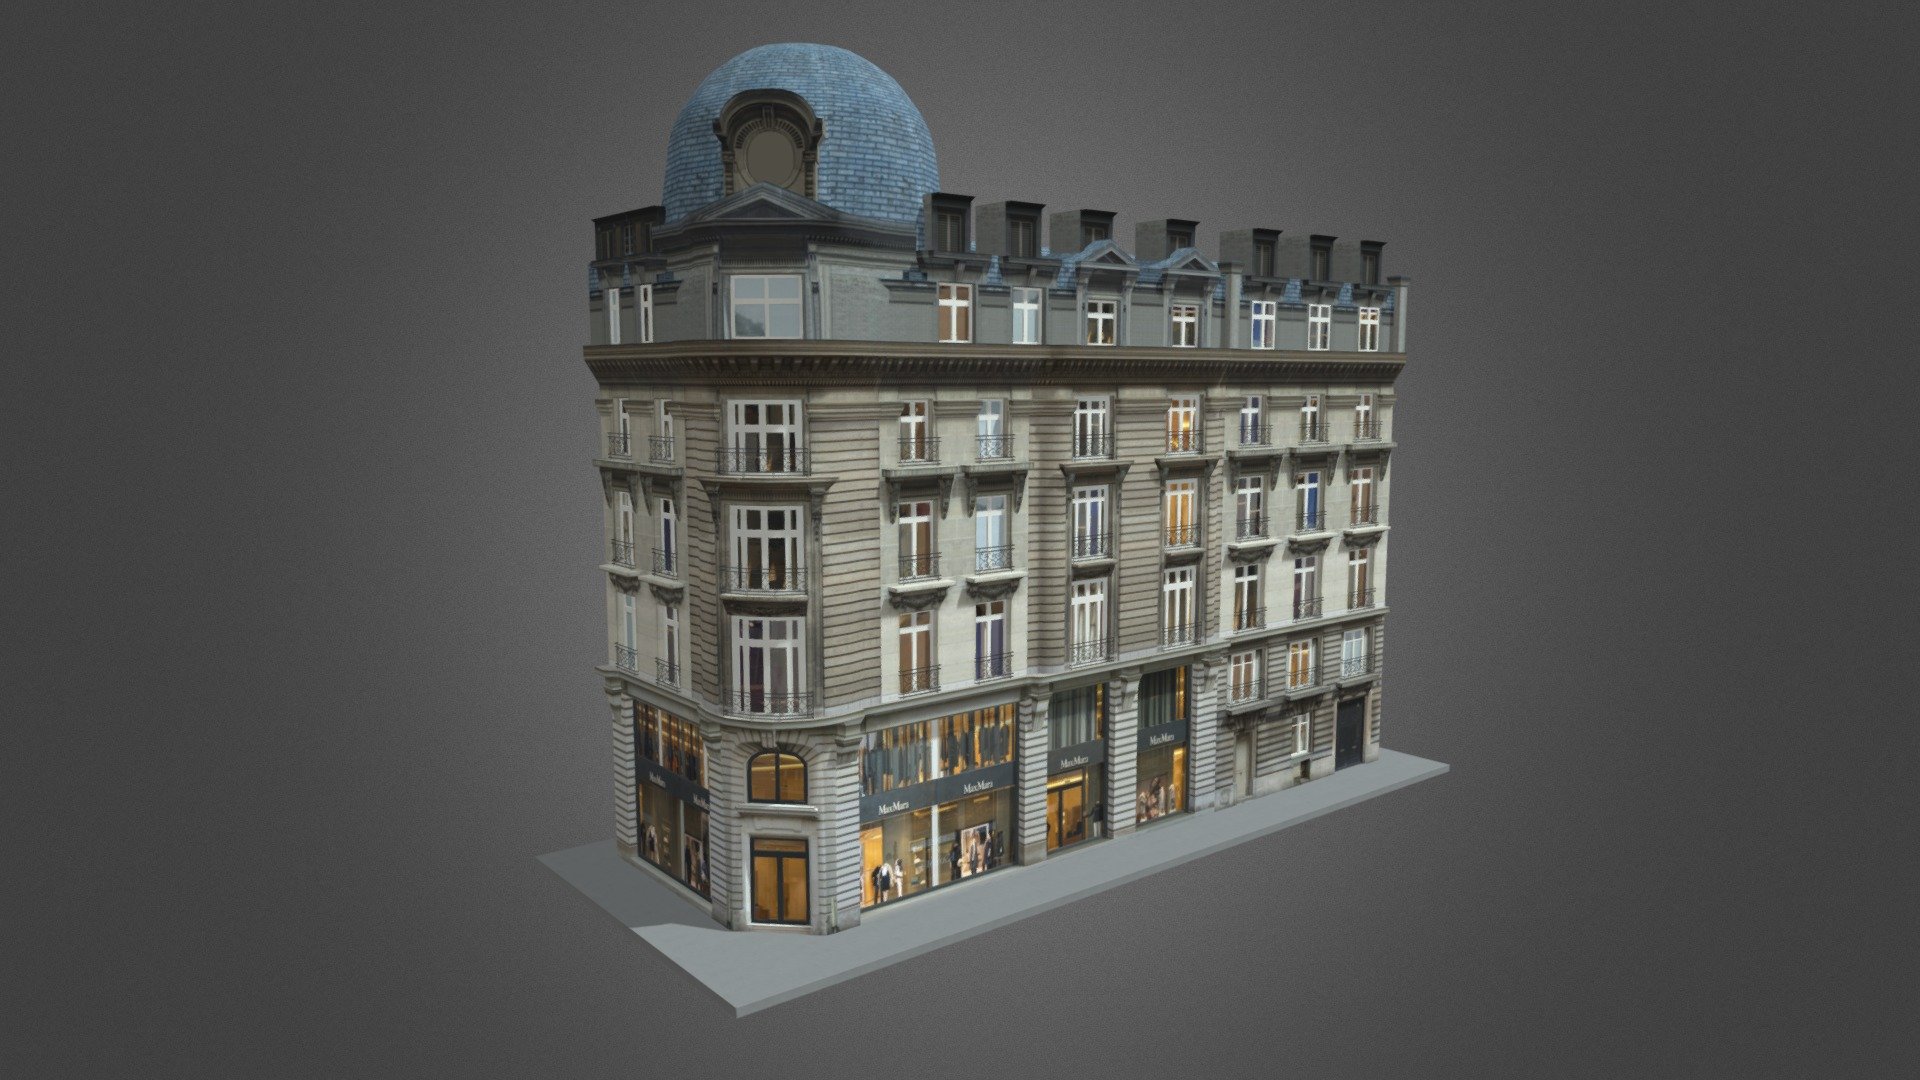 Typical Paris Building 03
Originally created with 3ds Max 2015 and rendered in V-Ray 3.0

Total Poly Counts:
Poly Count = 92898
Vertex Count = 95339

https://nuralam3d.blogspot.com/2022/11/typical-paris-building-03.html - Typical Paris Building 03 - 3D model by nuralam018 3d model